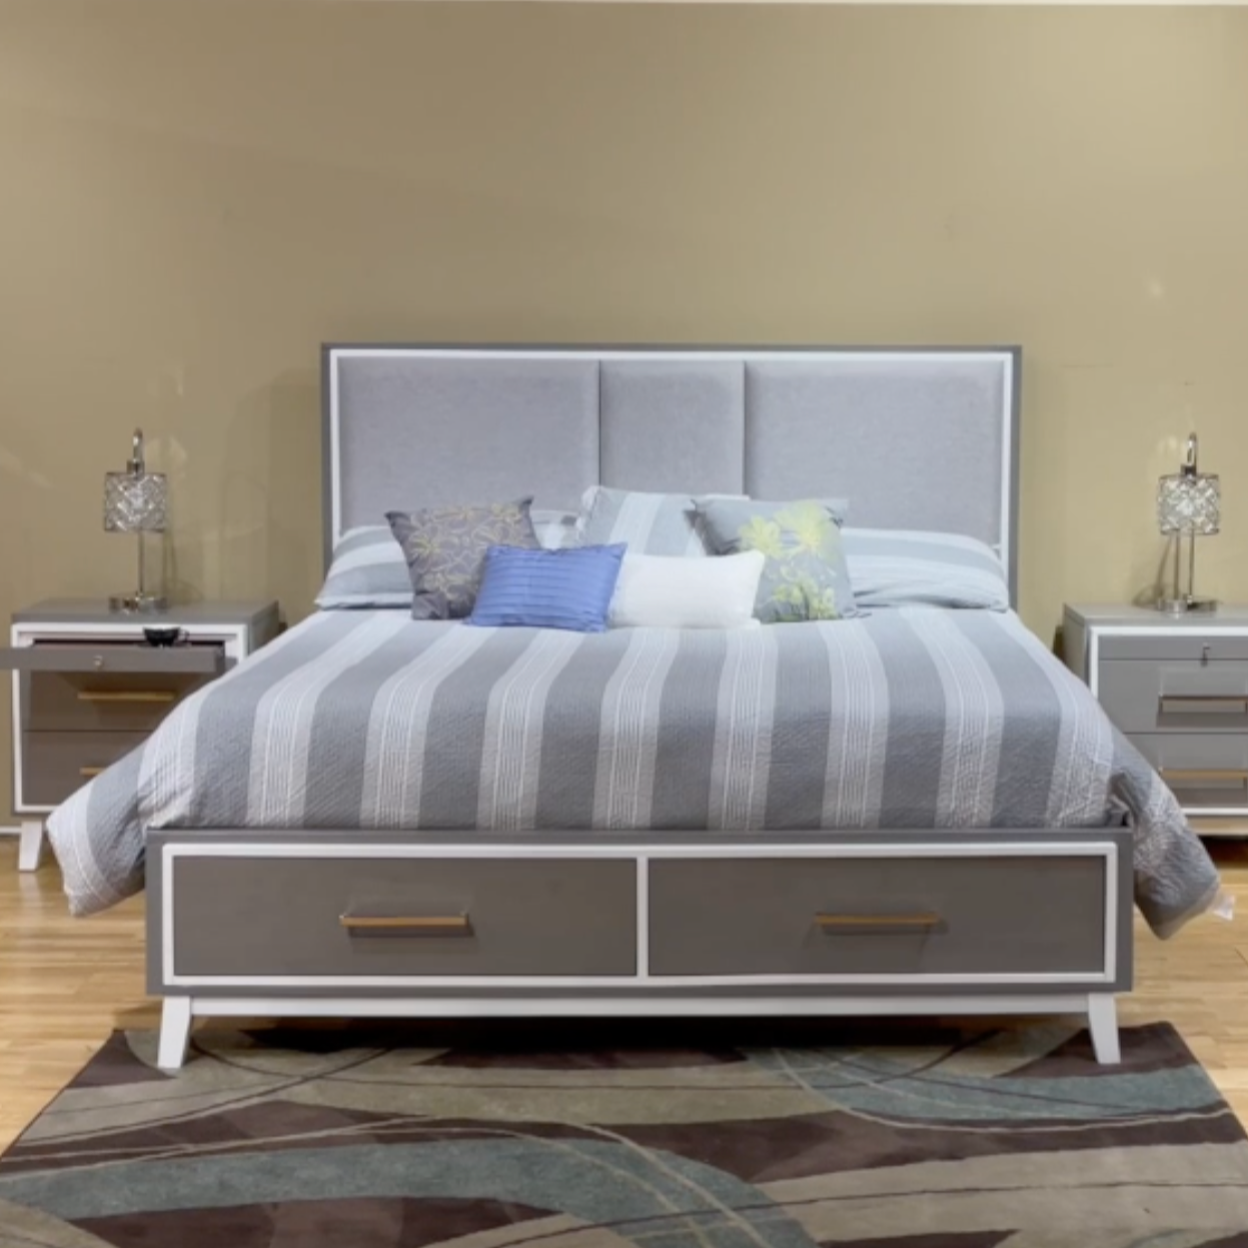 New Classic Furniture Zephyr California King Bed